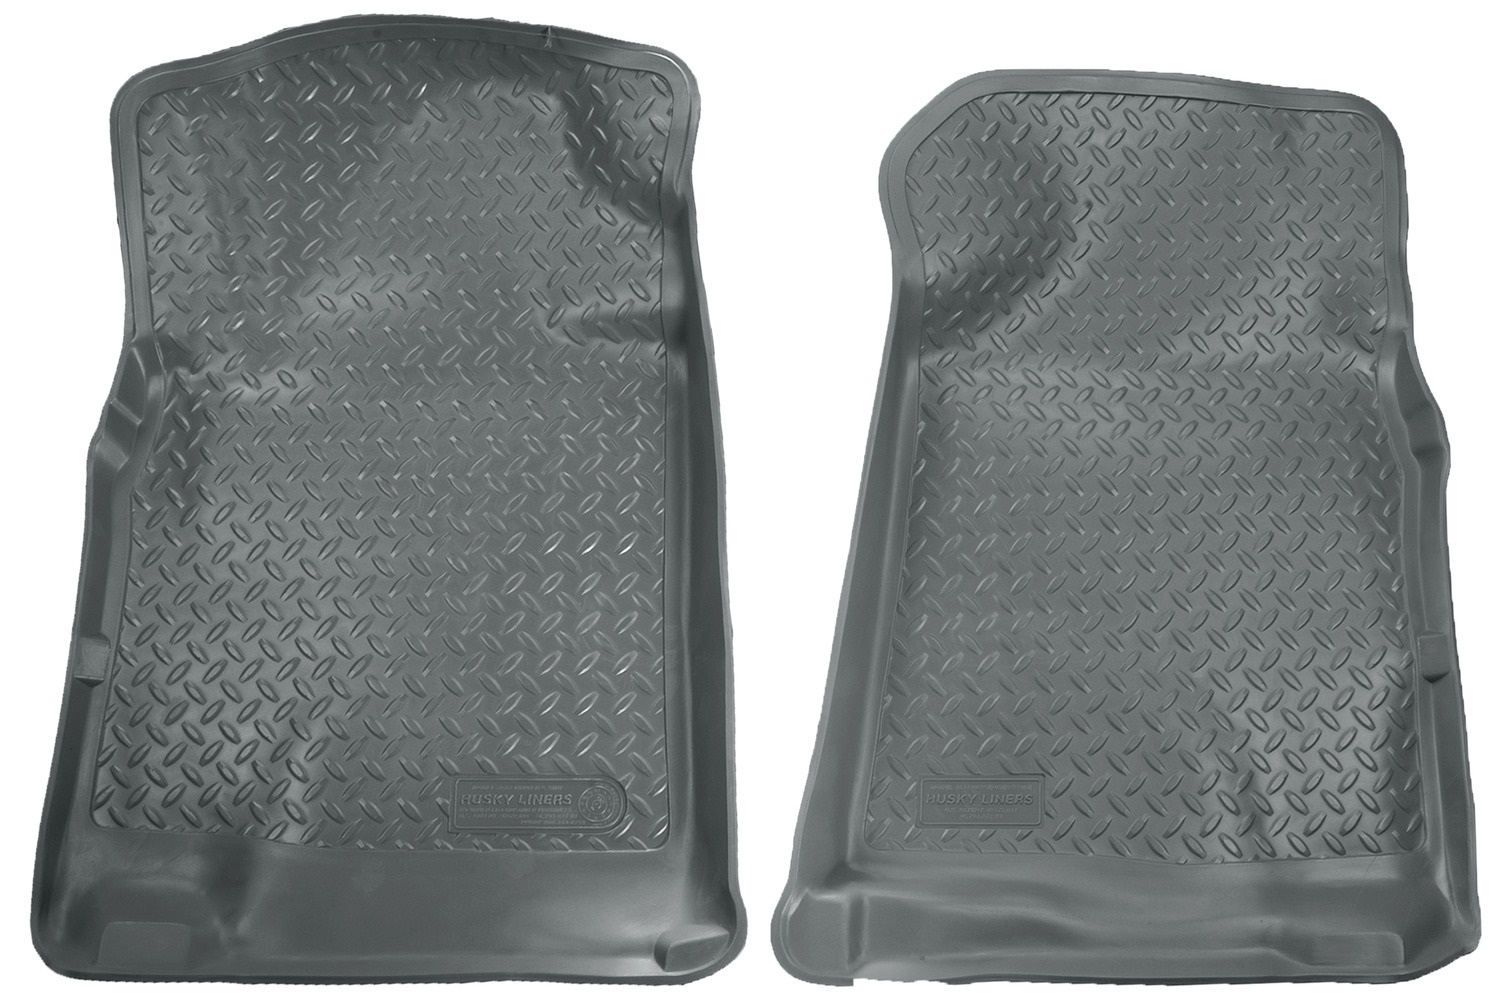 Husky Liners Husky Liners 35332 Classic Style; Floor Liner Fits 08-13 Land Cruiser LX570